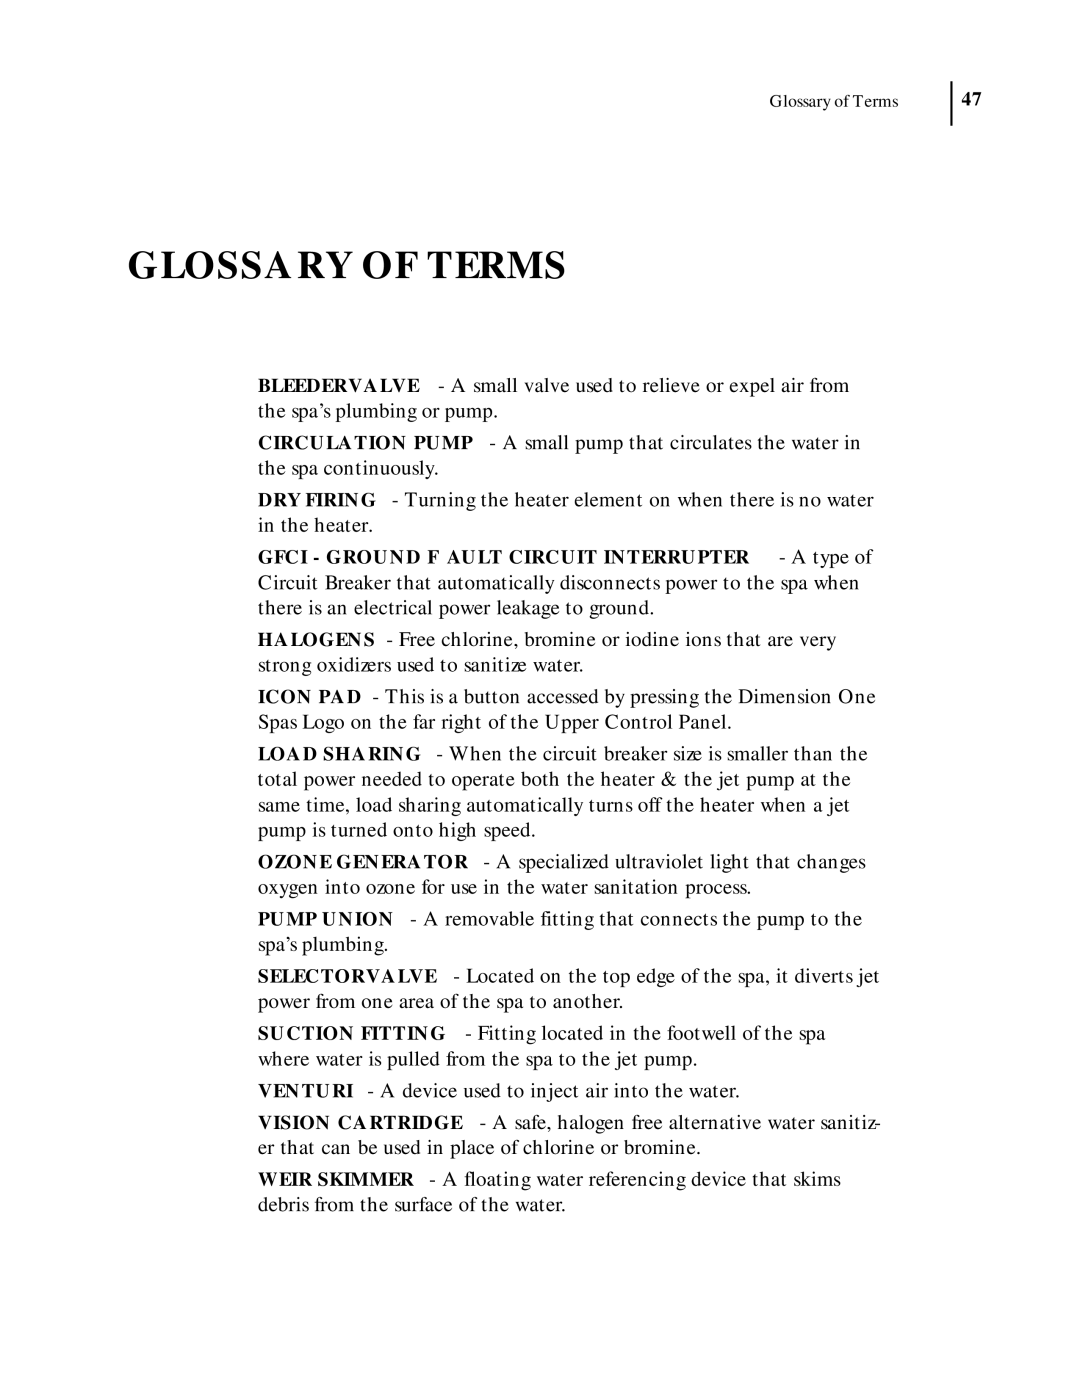 Dimension One Spas 2000 Model manual Glossary Of Terms 